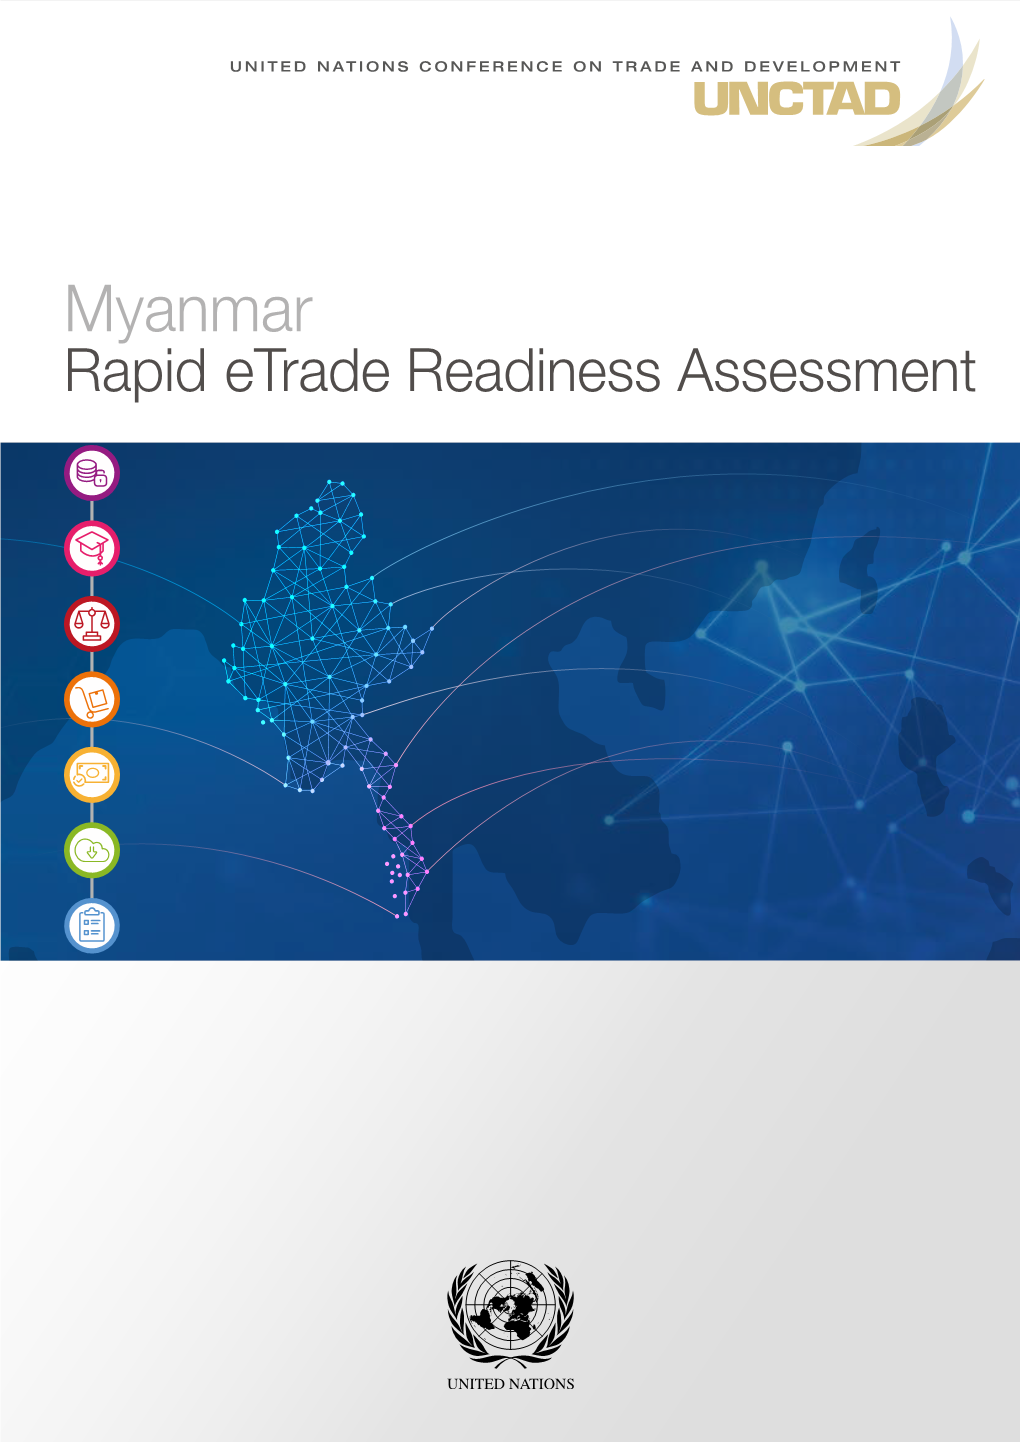 Rapid Etrade Readiness Assessment for Myanmar